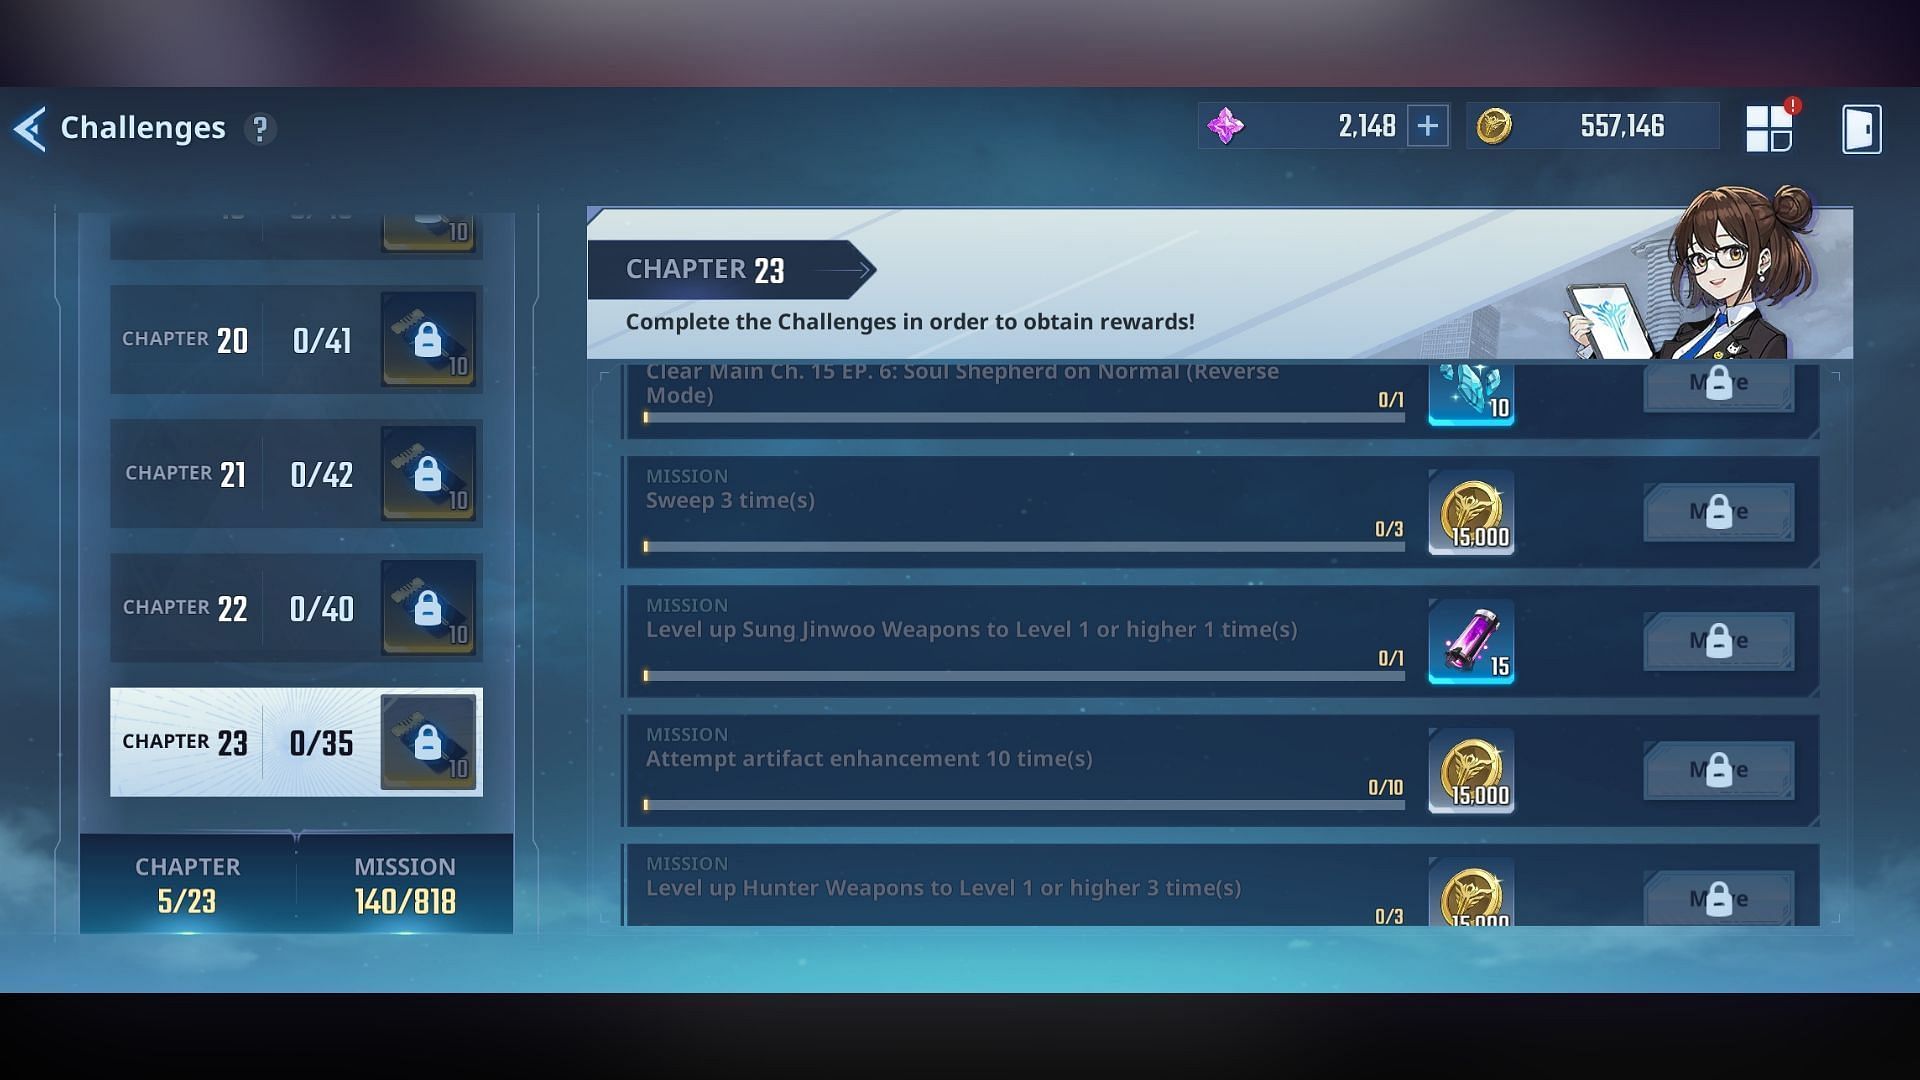 Netmarble has modified certain missions in the Challenges section (Image via Netmarble)